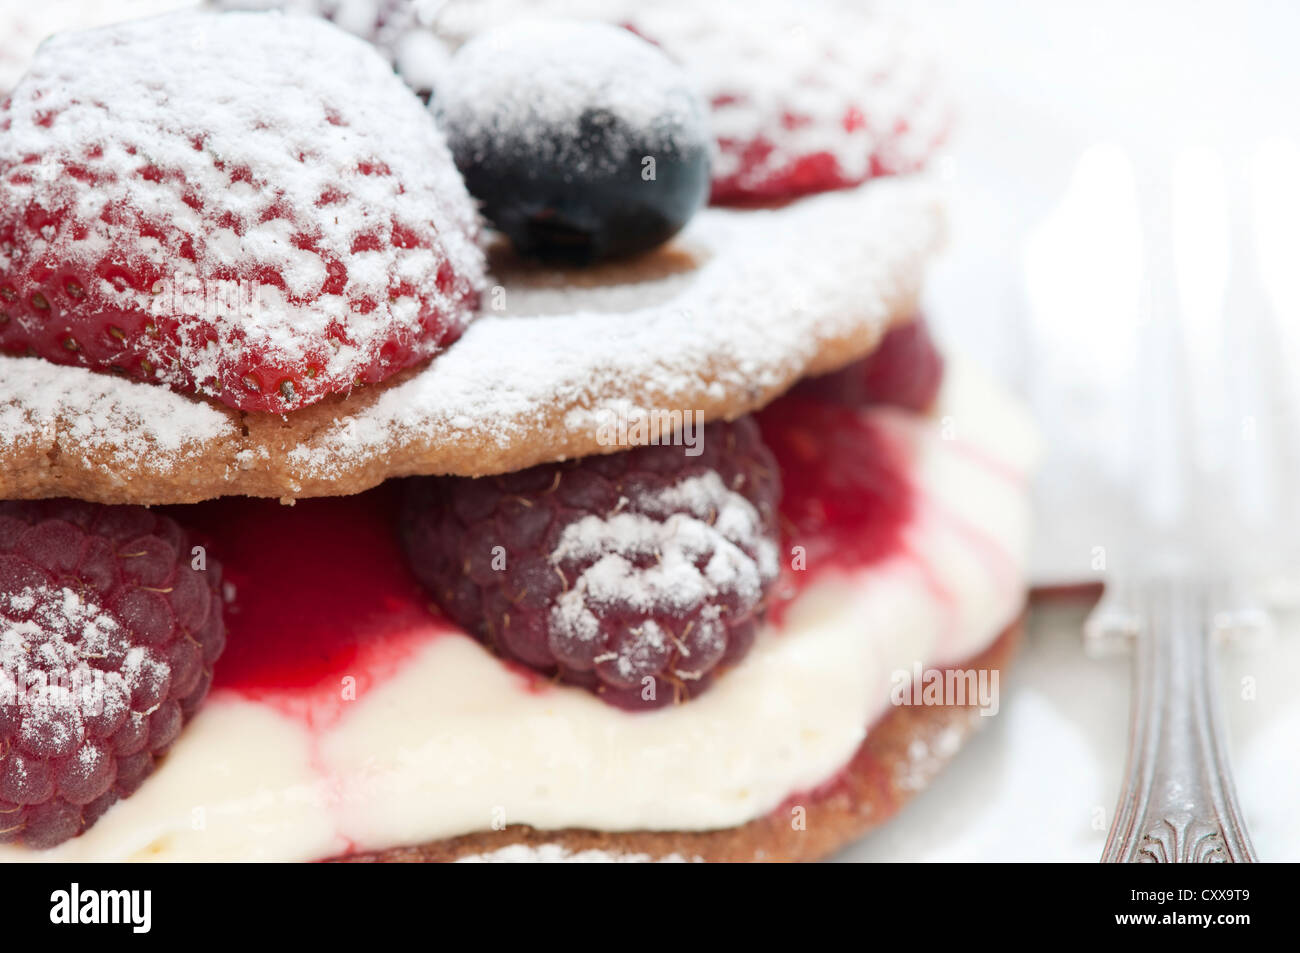 Freshly made strawberry and blueberry shortcake with confectioner's custard, cream and icing sugar frosting Stock Photo